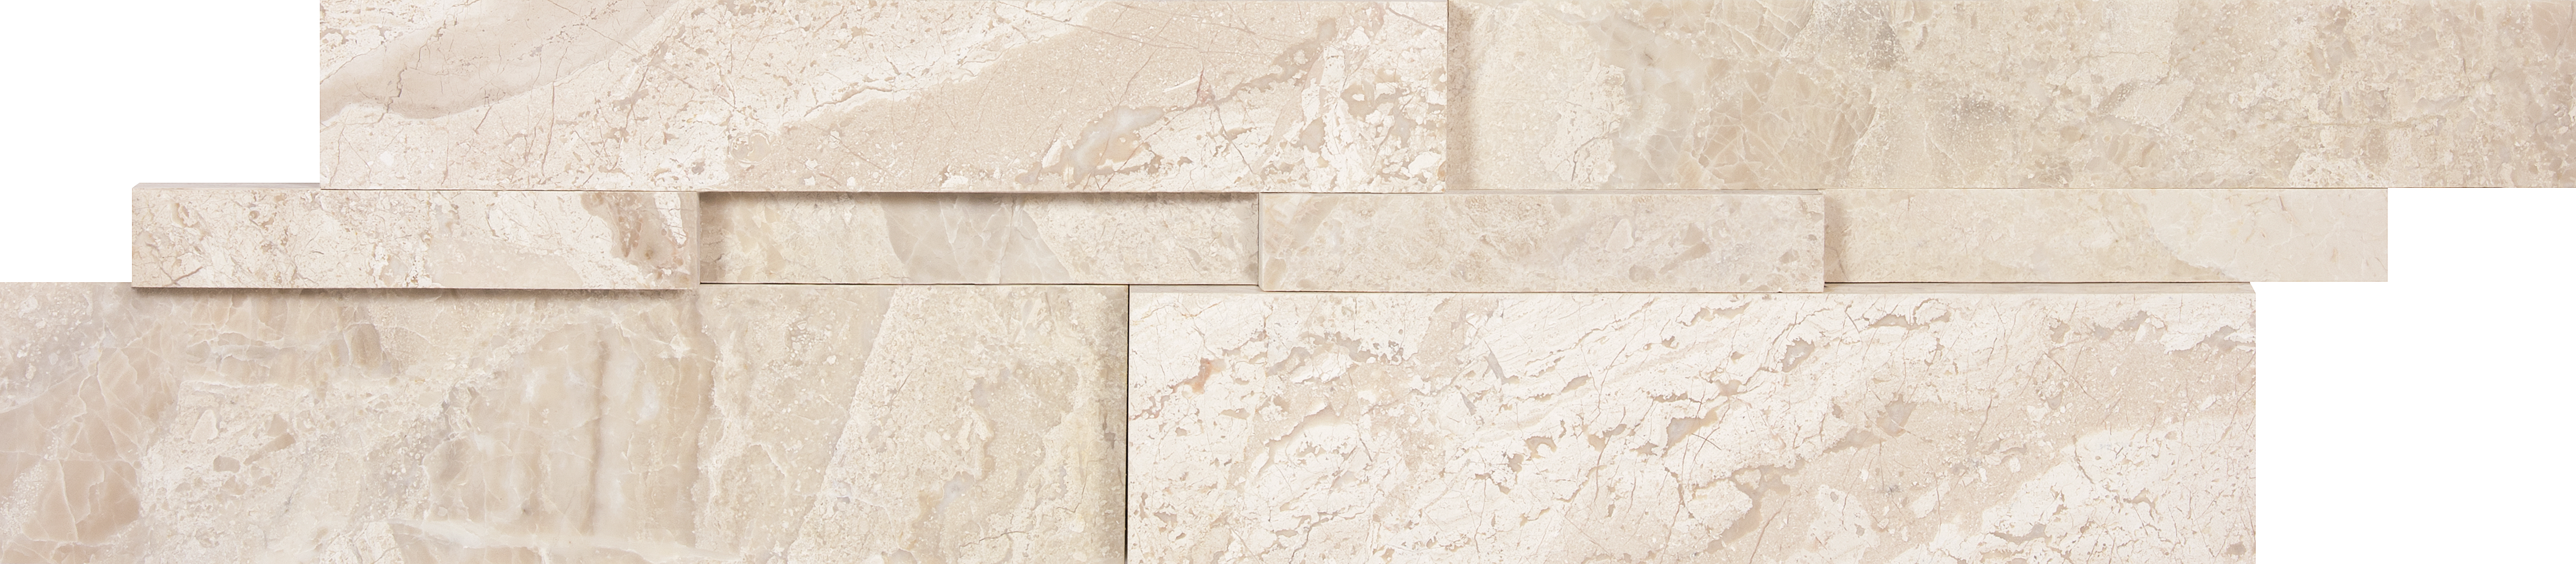 marble impero reale pattern natural stone wall panel from cubics anatolia collection distributed by surface group international honed finish straight edge edge 6x24 interlocking shape